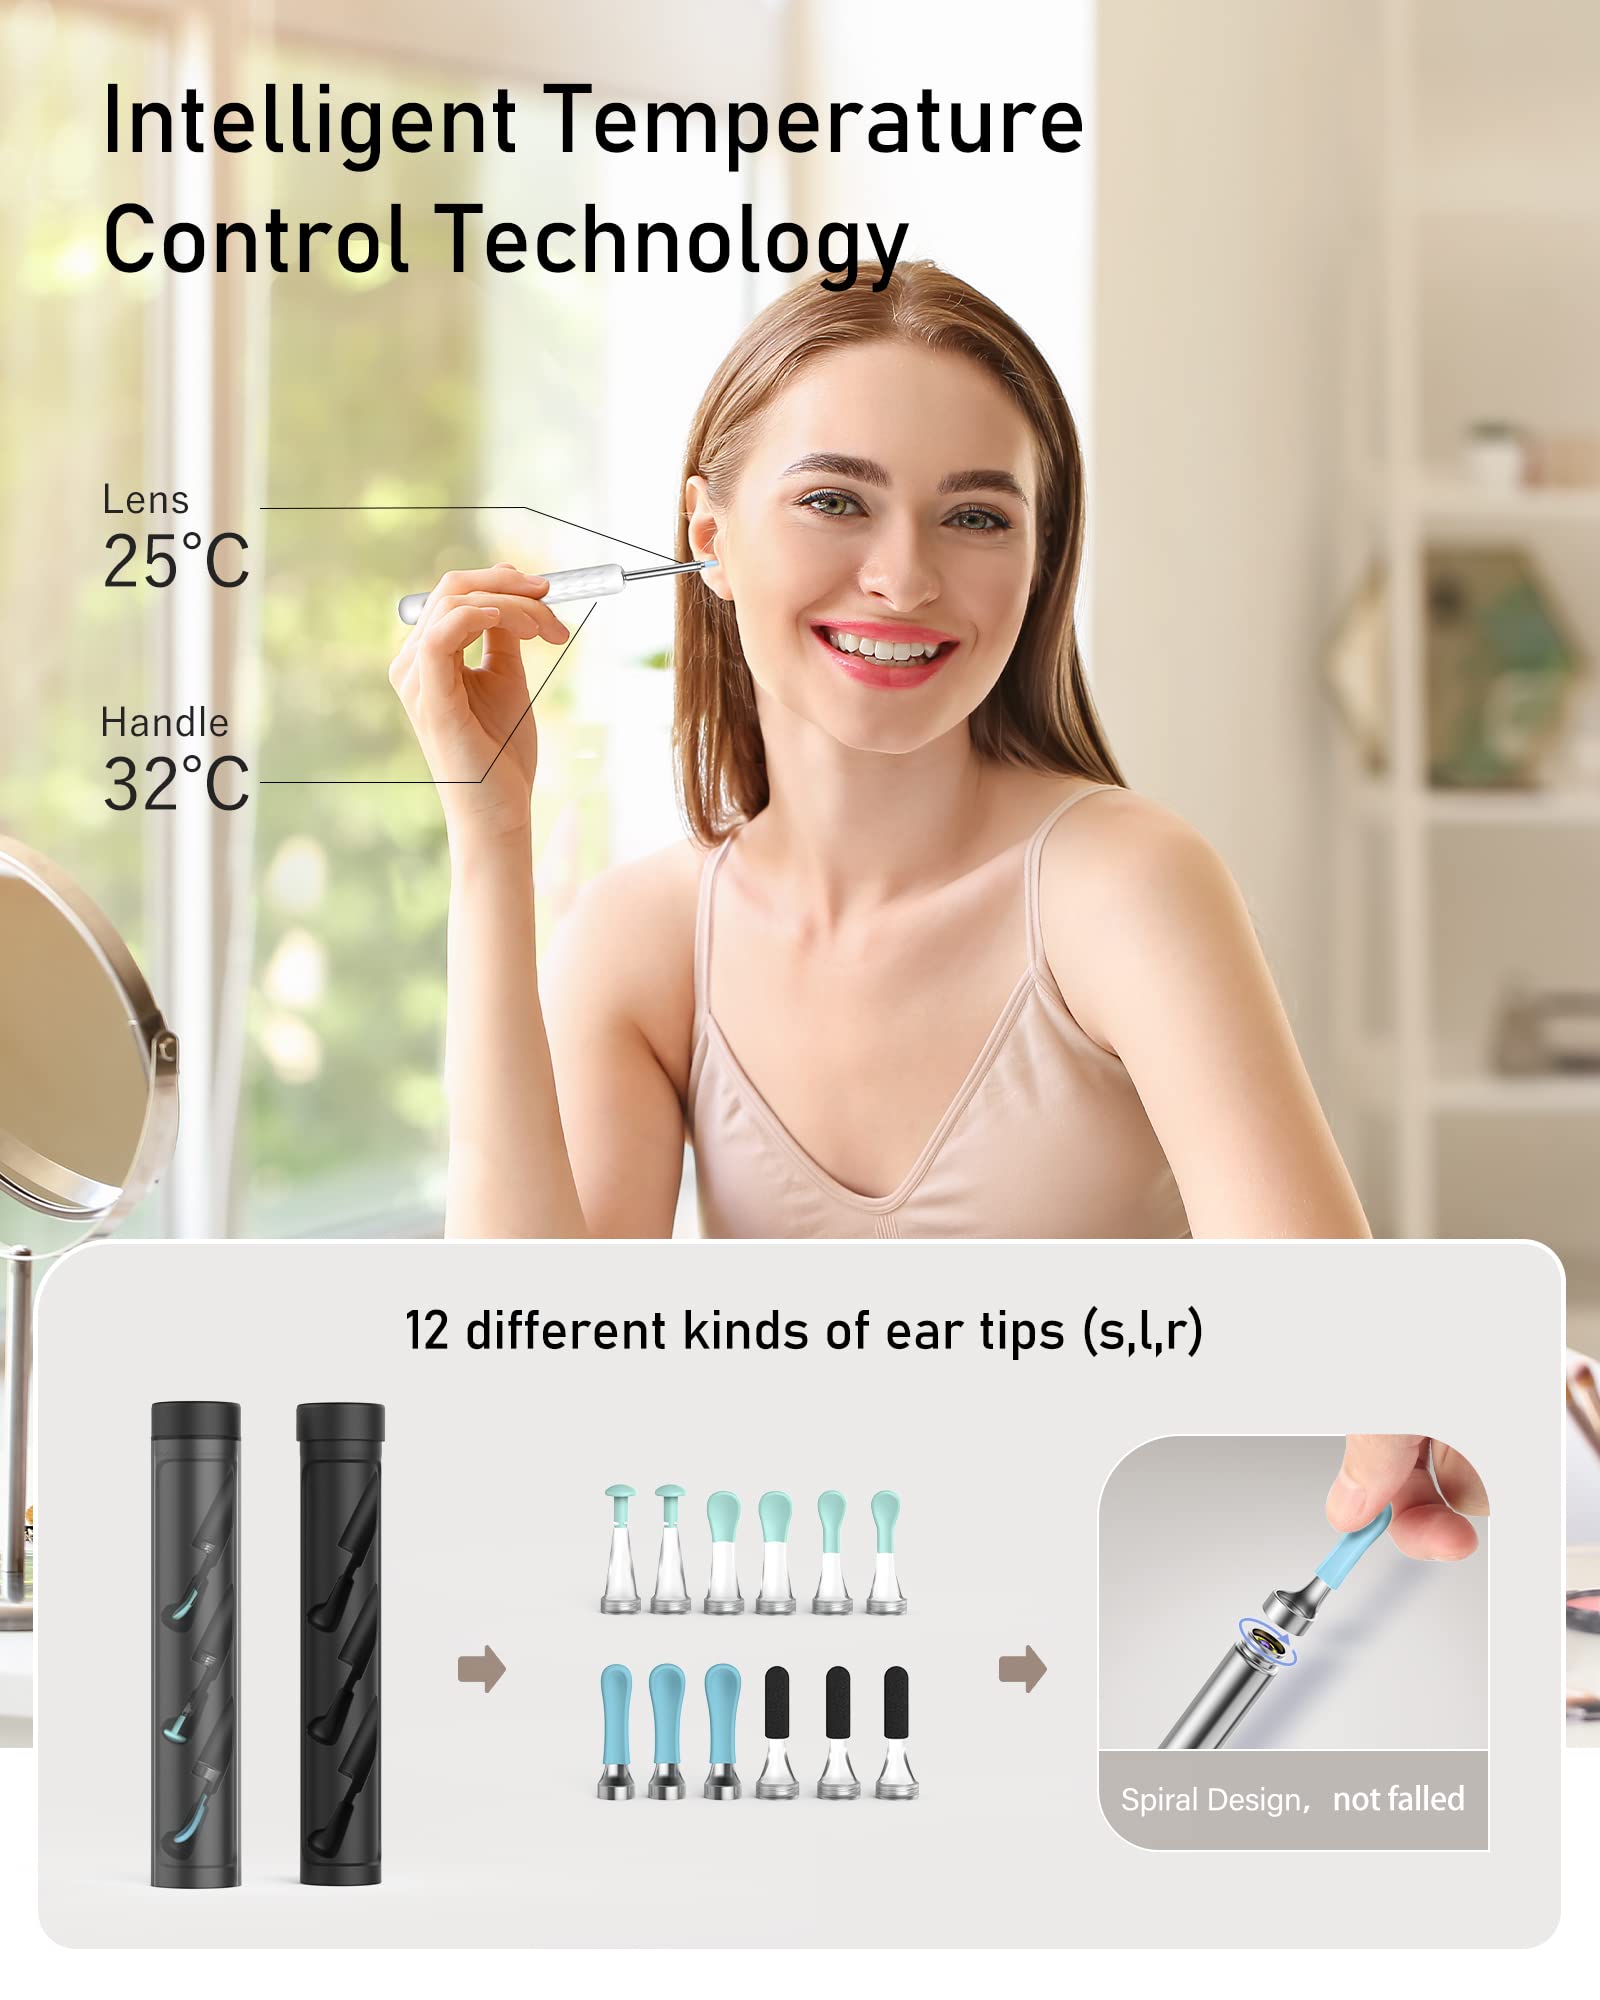 Bebird Pro Ear Wax Removal Tool with 1440P HD Camera and 6 LED Lights, Free with Deep Cleaning Blackhead Remover, Ear Cleaner for Smaller Ears,FDA Ear Wax Removal Kit for iOS,Android Phones